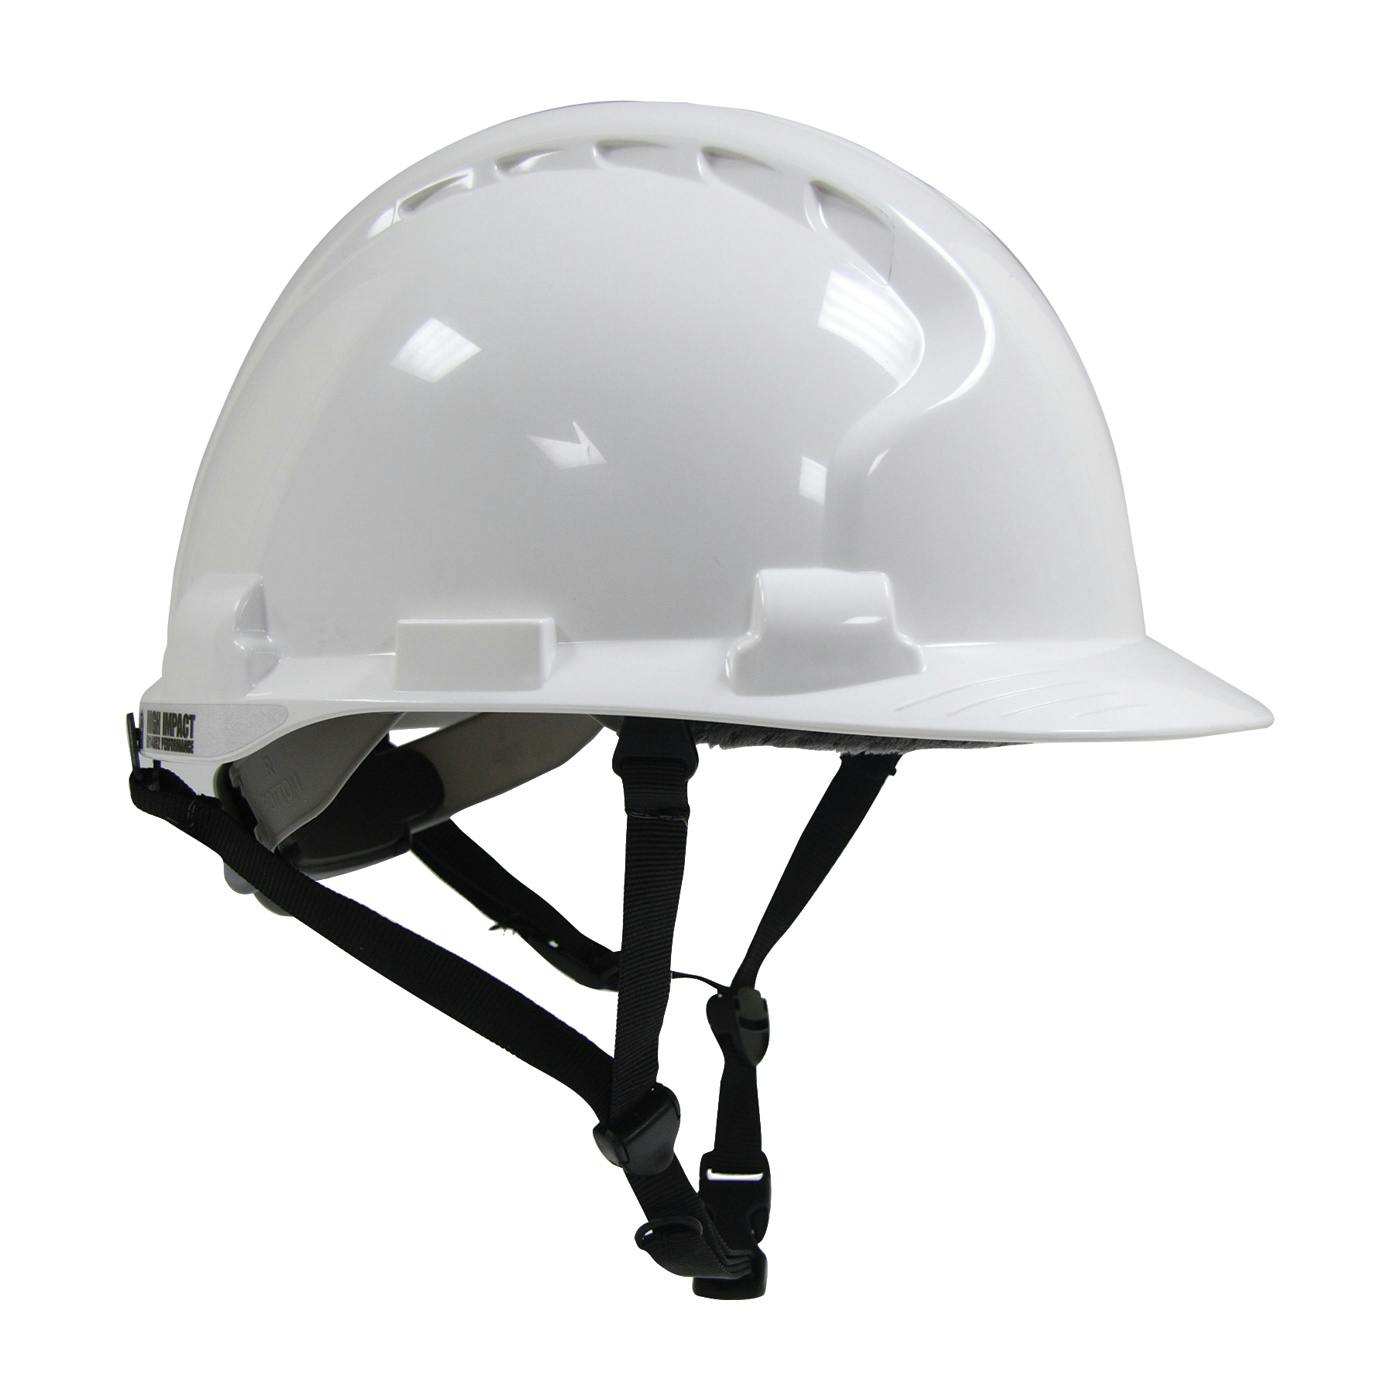 MK8 Evolution® Type II Linesman Hard Hat with HDPE Shell, EPS Impact Liner, Polyester Suspension, Wheel Ratchet Adjustment and 4-Point Chin Strap (280-AHS240)